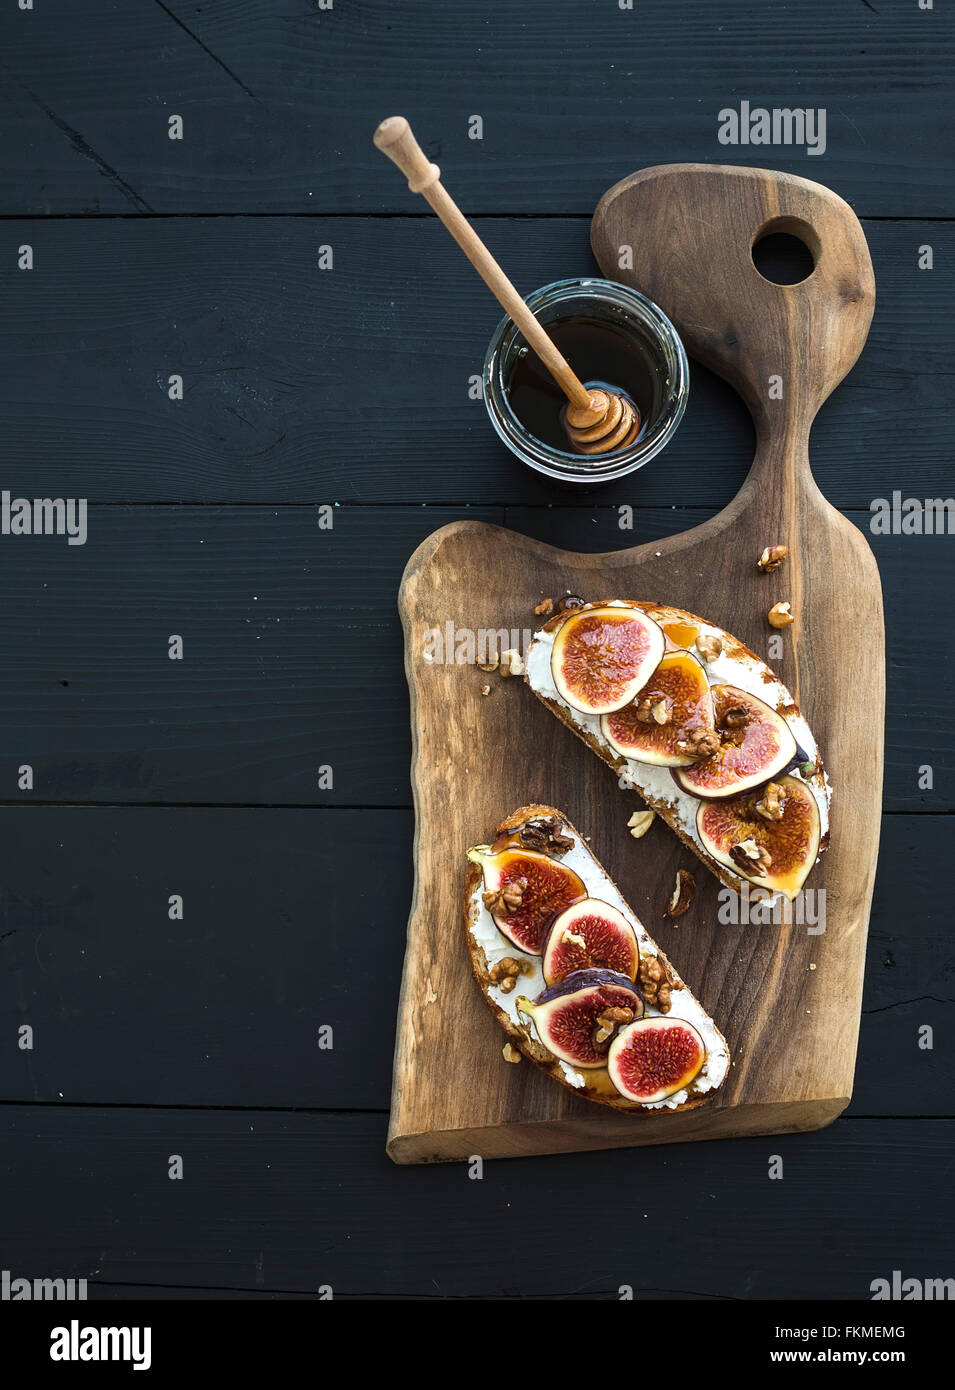 Sandwiches with ricotta, fresh figs, walnuts and honey on rustic wooden board over black backdrop, top view Stock Photo